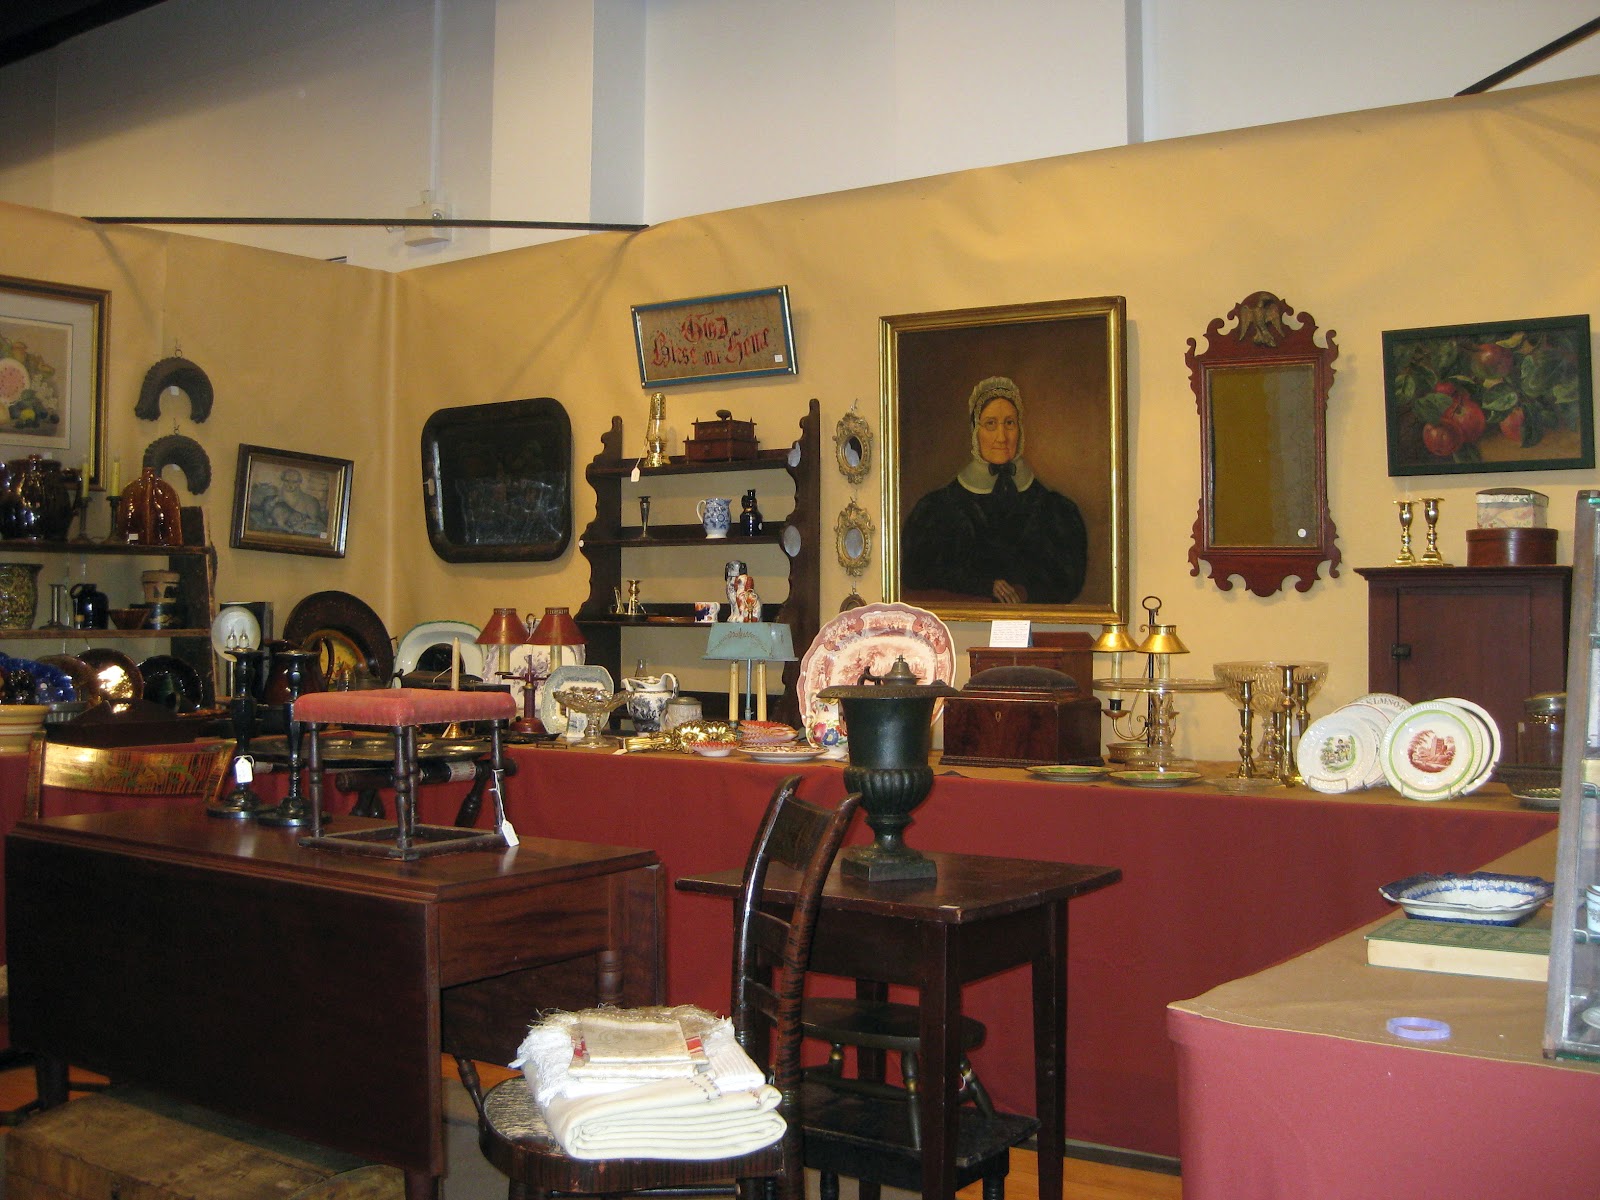 Historic Warren County Ohio Antique Show Opens Tomorrow in Downtown